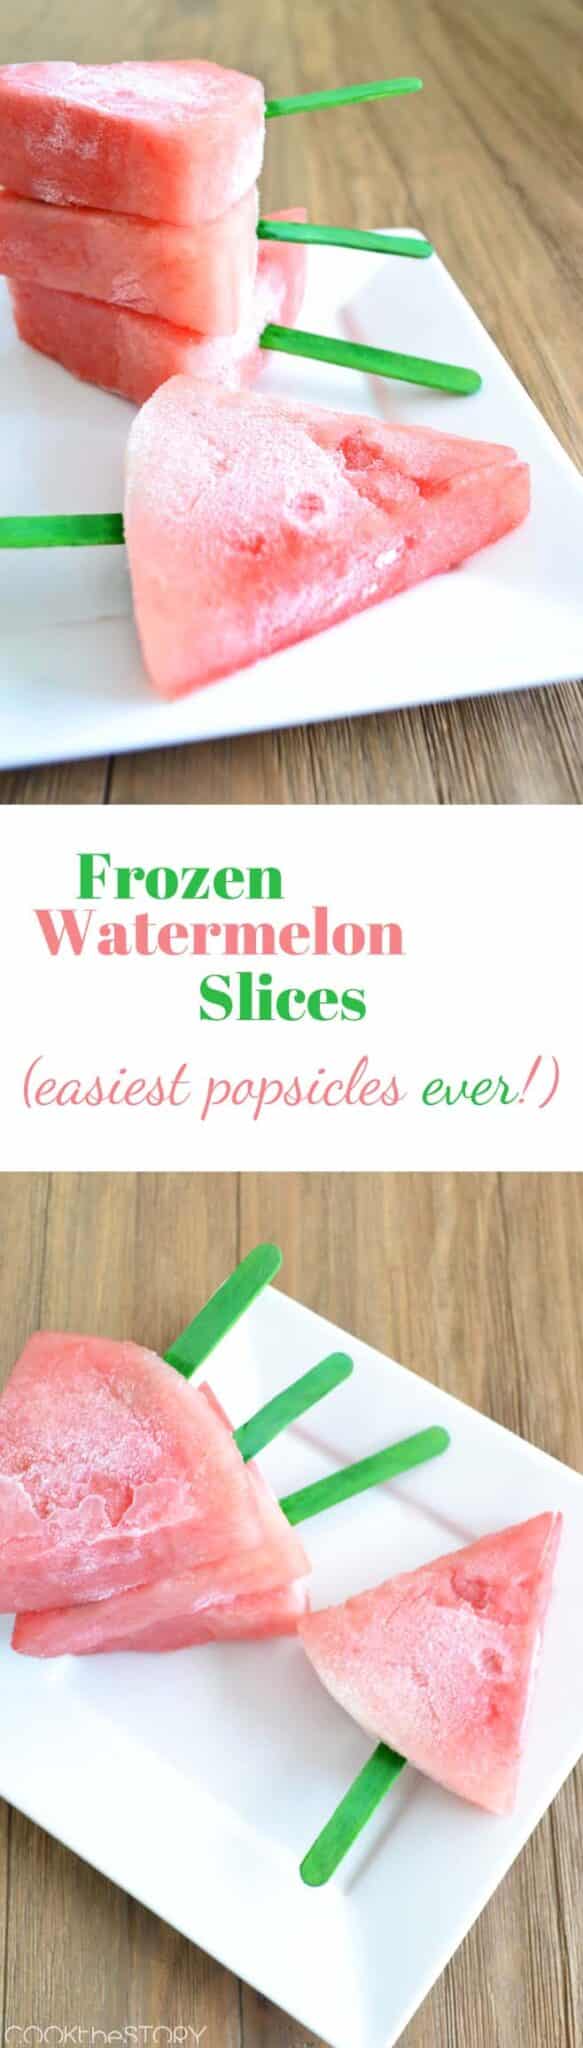 Frozen Watermelon: The Easiest Popsicle Ever